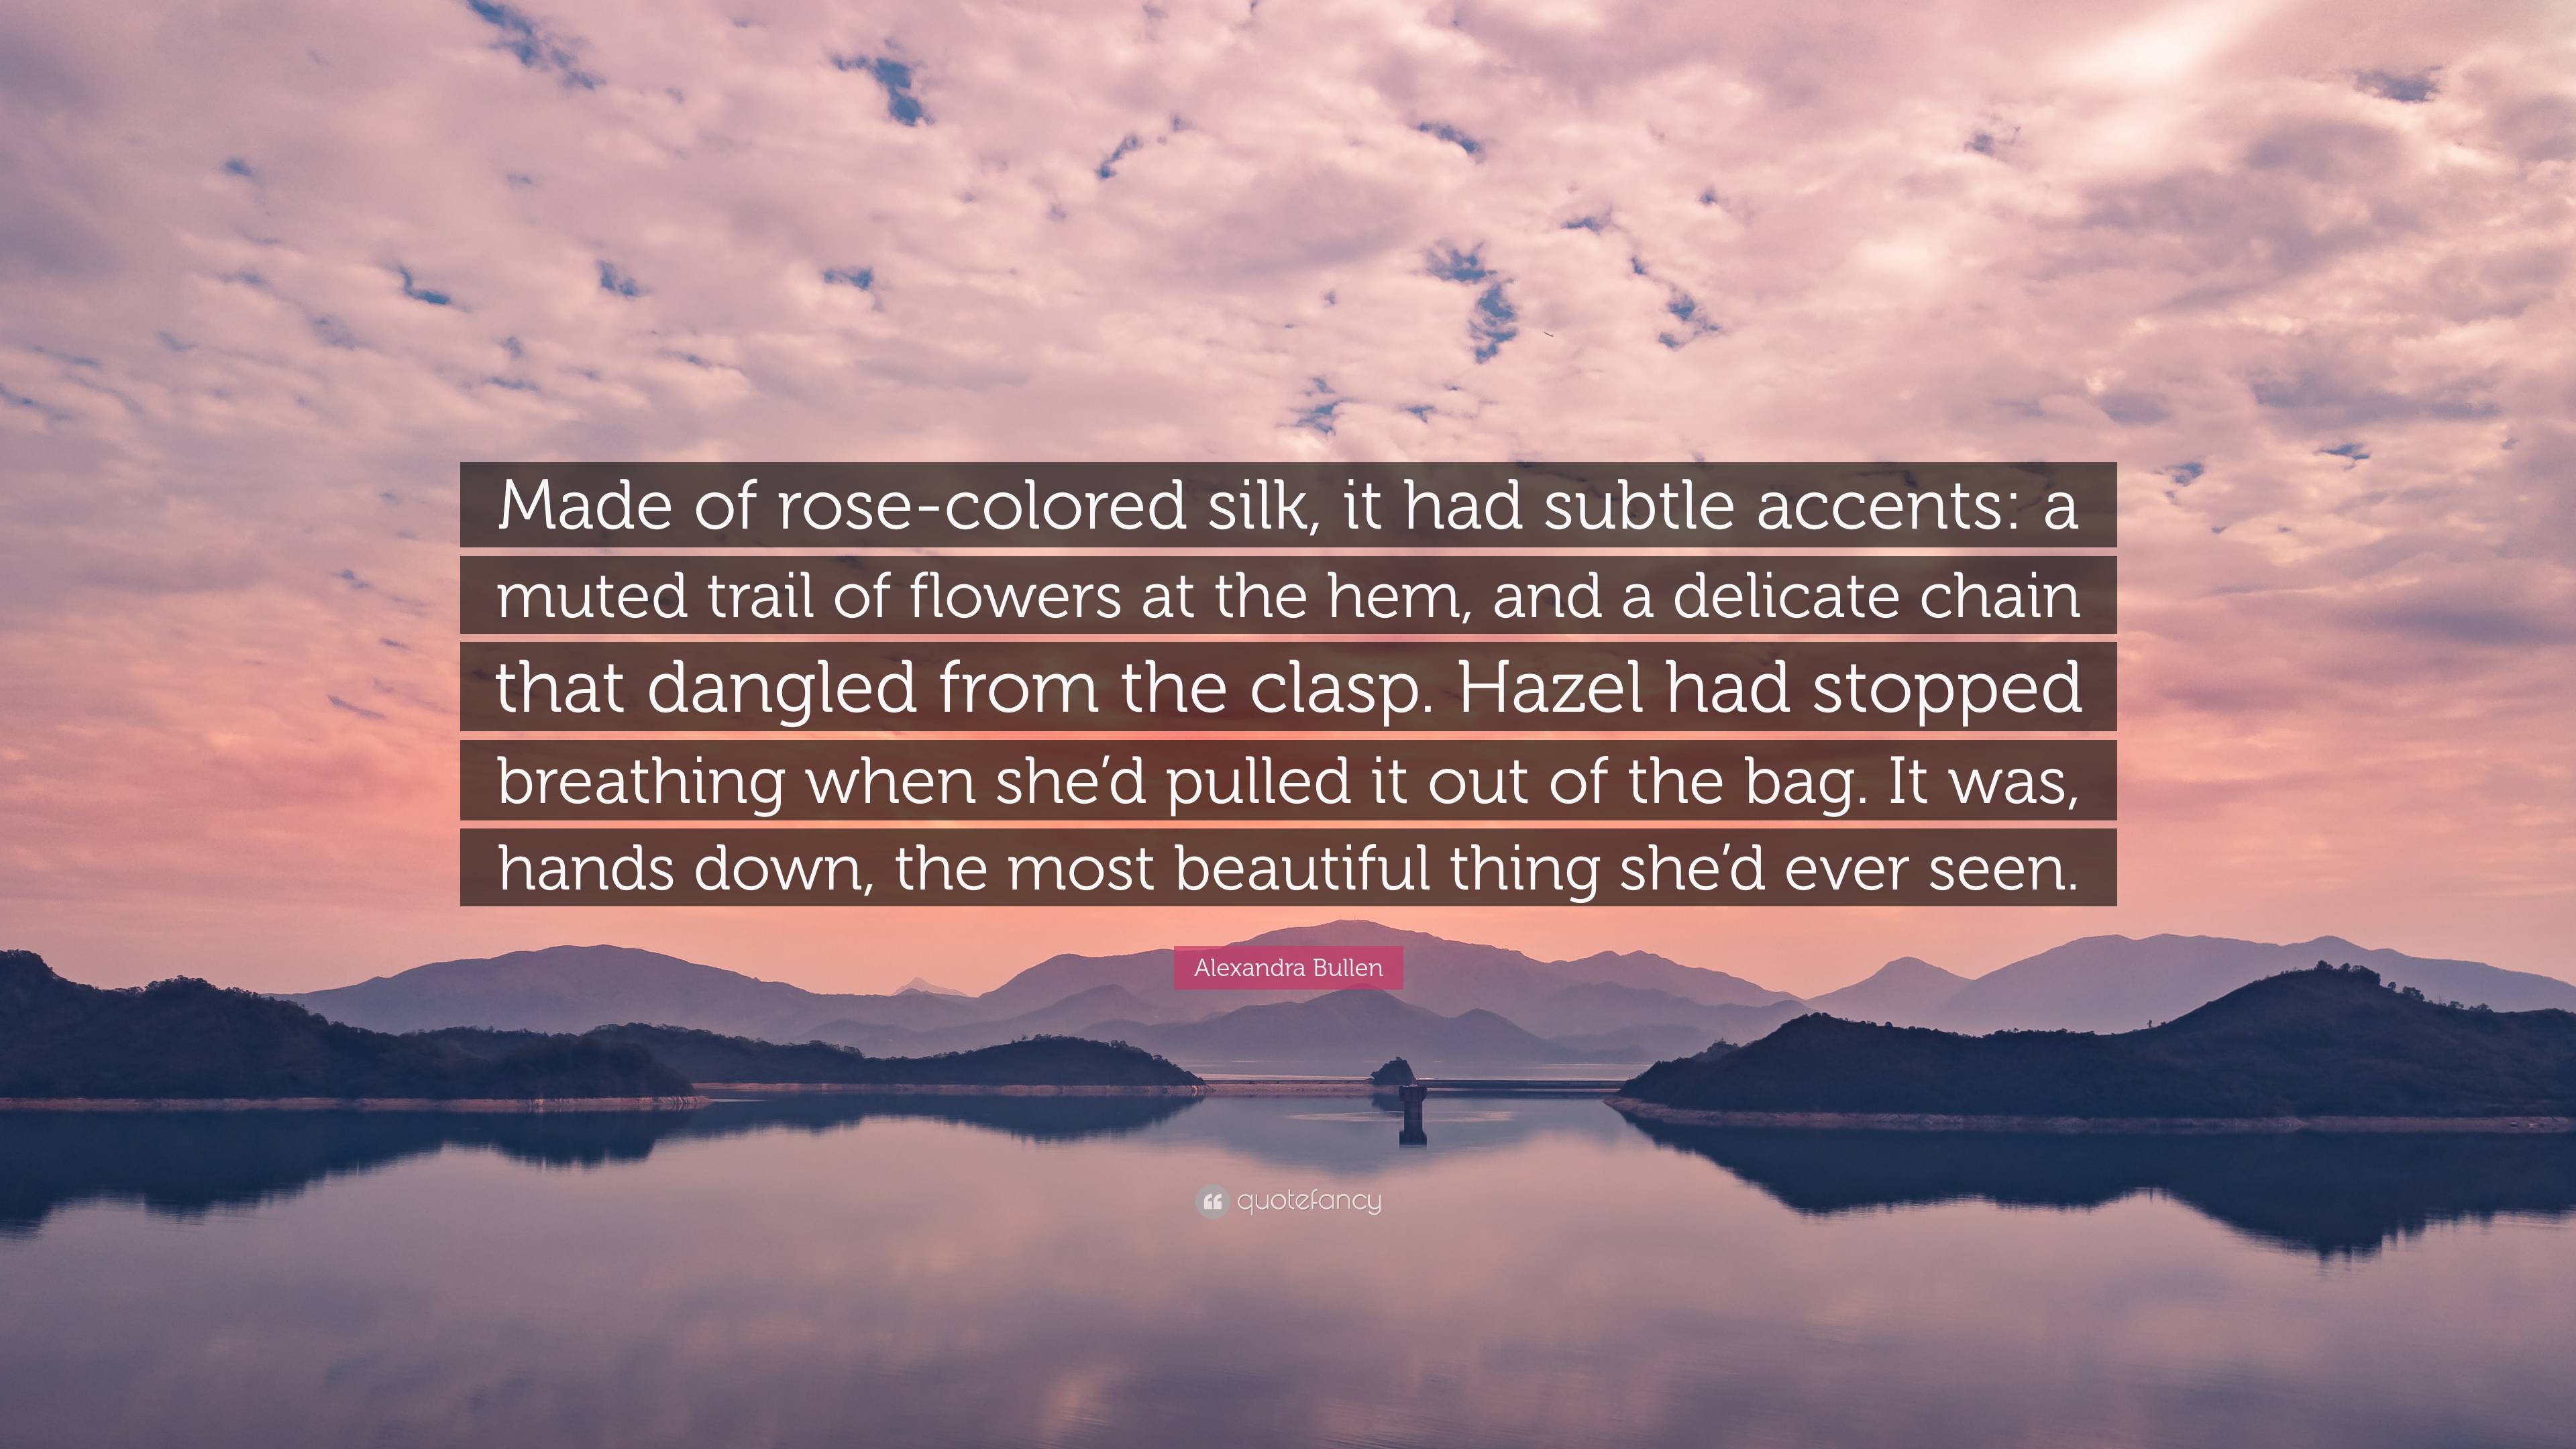 Alexandra Bullen Quote: “Made of rose-colored silk, it had subtle accents:  a muted trail of flowers at the hem, and a delicate chain that dangled”